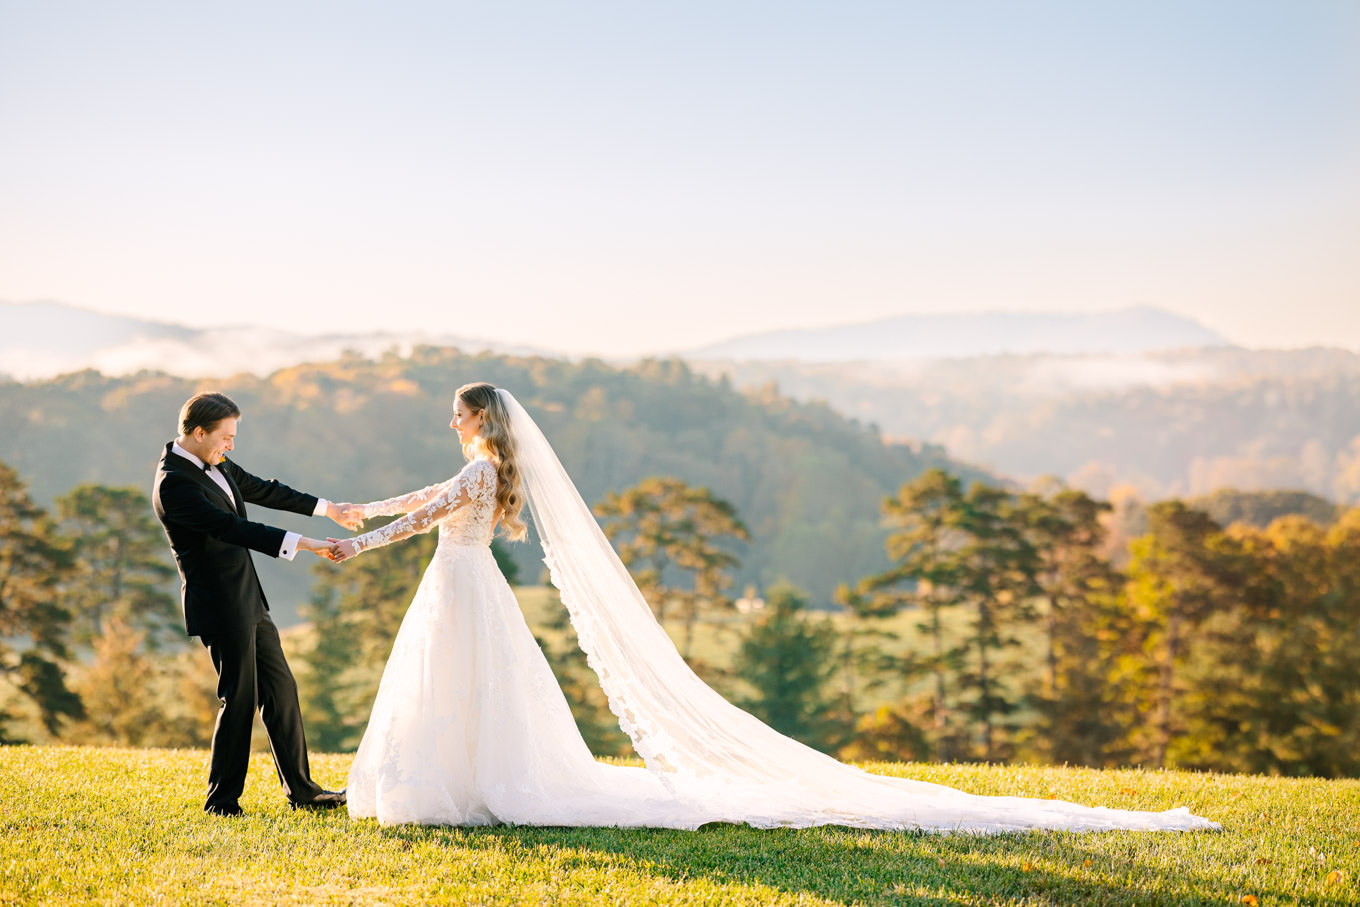 Biltmore Estate wedding in North Carolina | Wedding and elopement photography roundup | Los Angeles and Palm Springs  photographer | #losangeleswedding #palmspringswedding #elopementphotographer

Source: Mary Costa Photography | Los Angeles